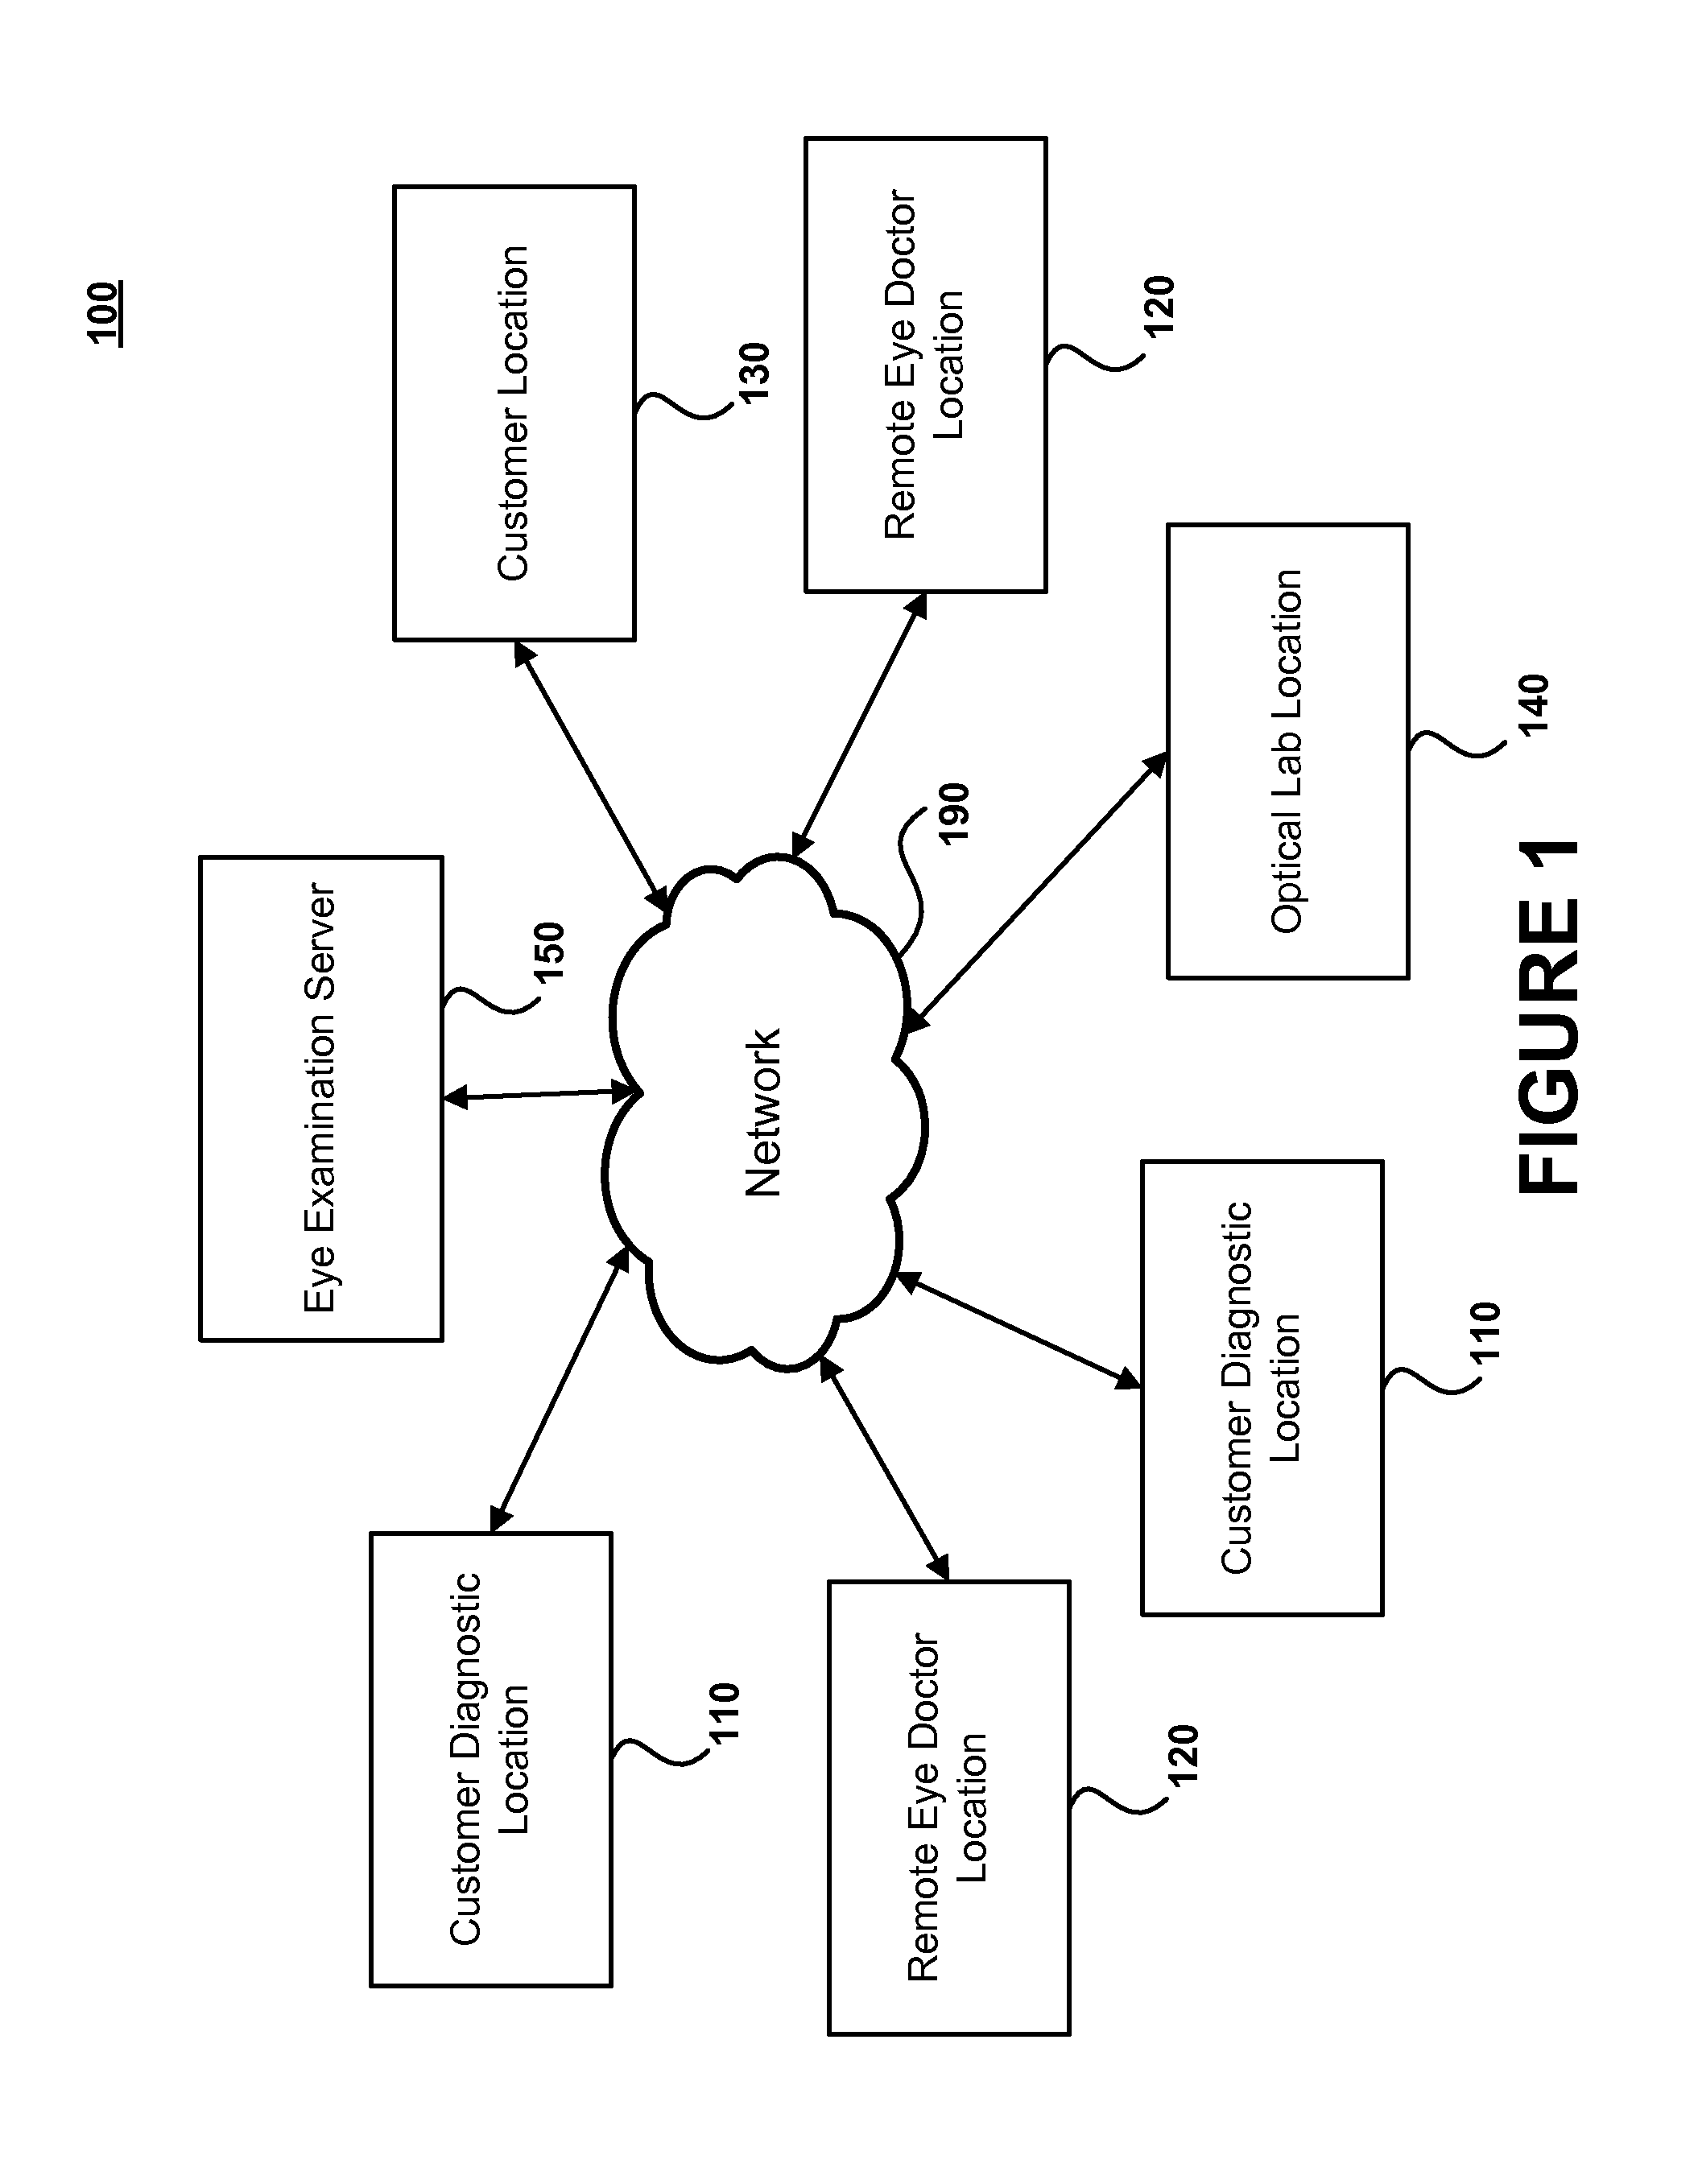 System and method for enabling customers to obtain refraction specifications and purchase eyeglasses or contact lenses